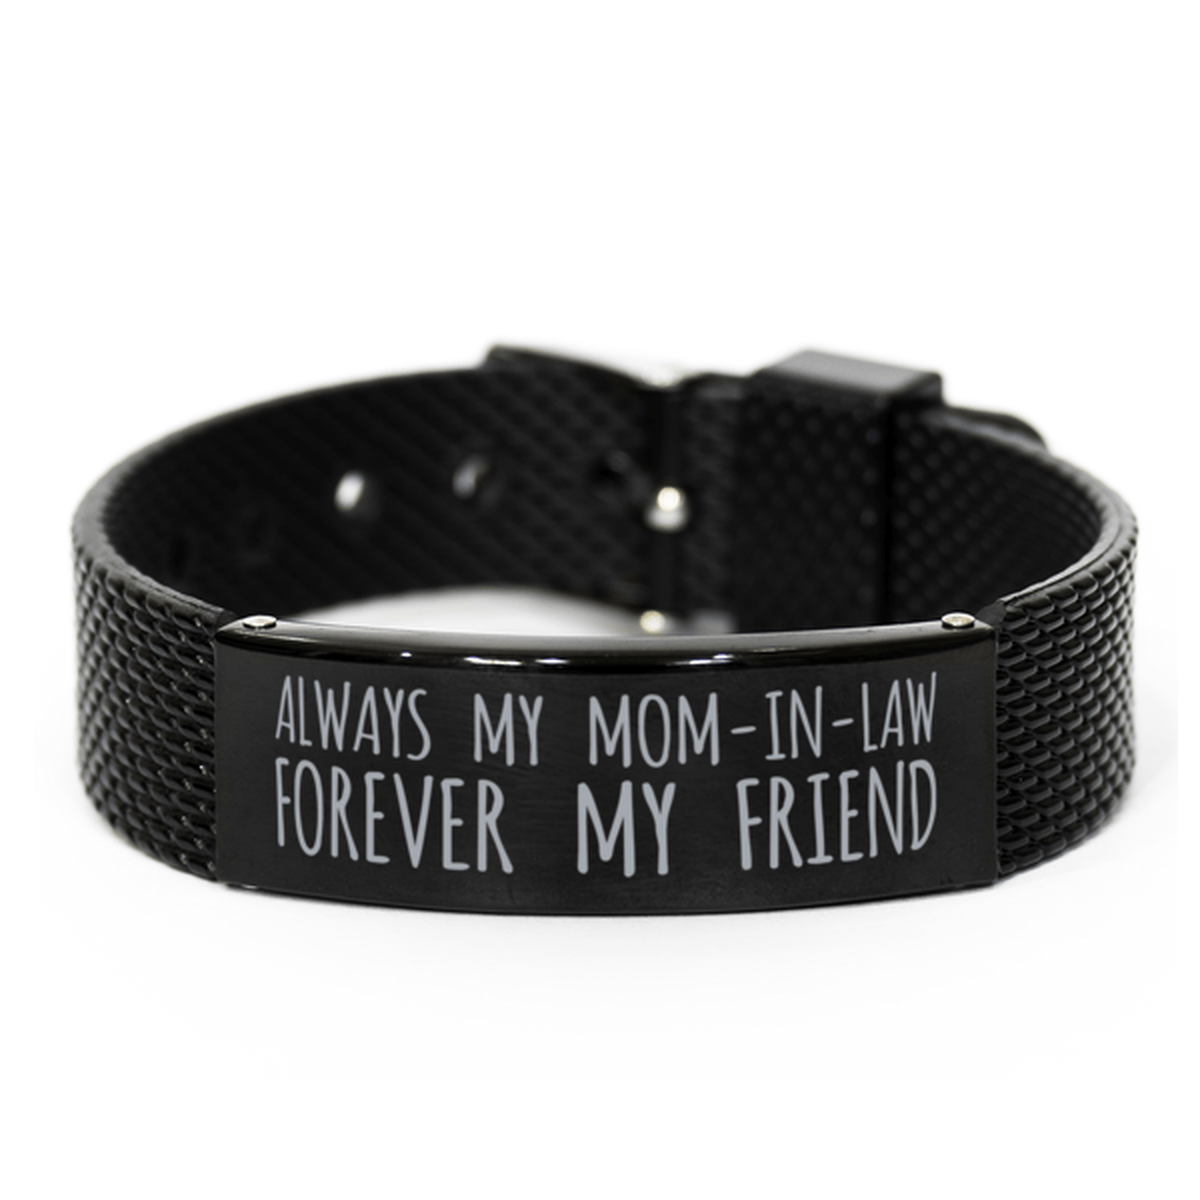 Inspirational Mom-In-Law Black Shark Mesh Bracelet, Always My Mom-In-Law Forever My Friend, Best Birthday Gifts for Family Friends